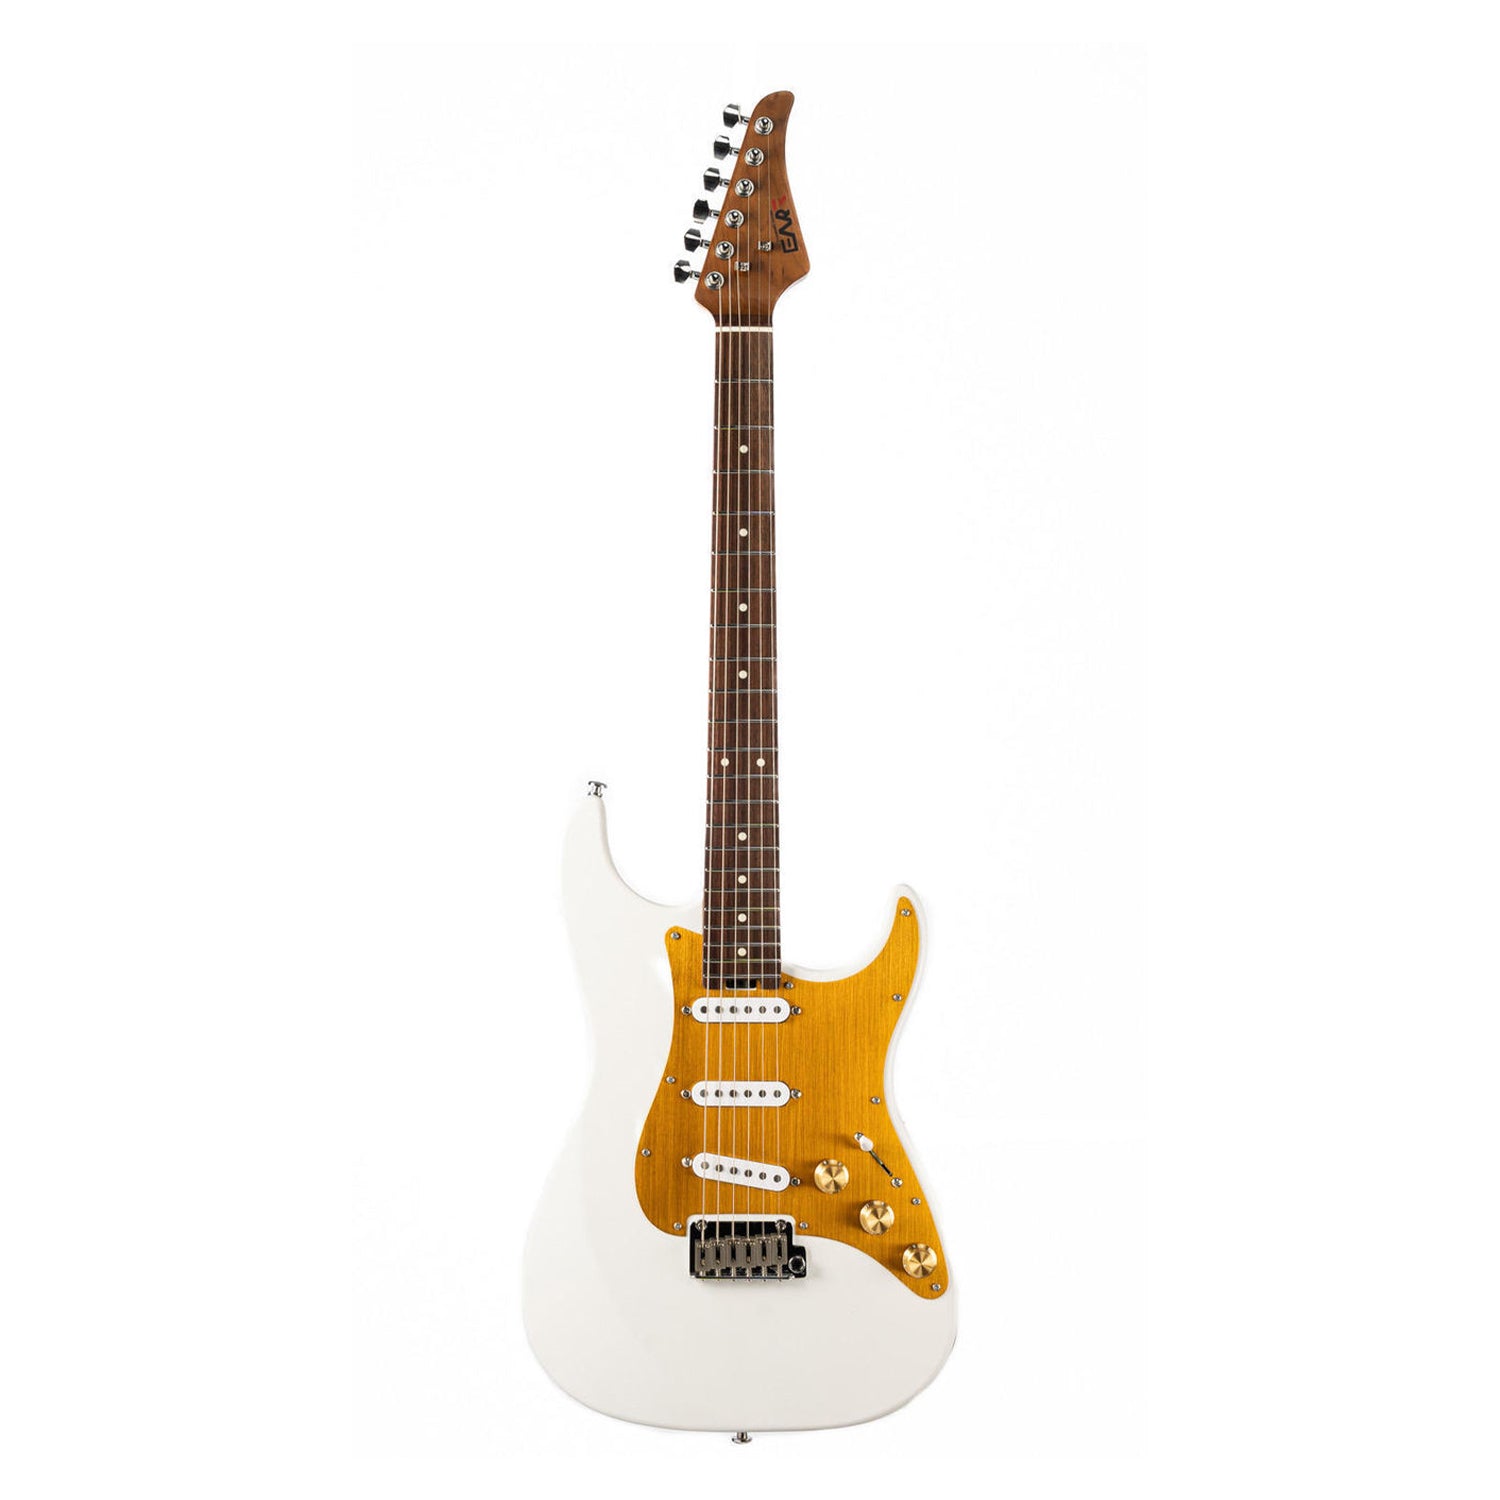 EART electric guitar Rocking-65 pearl white